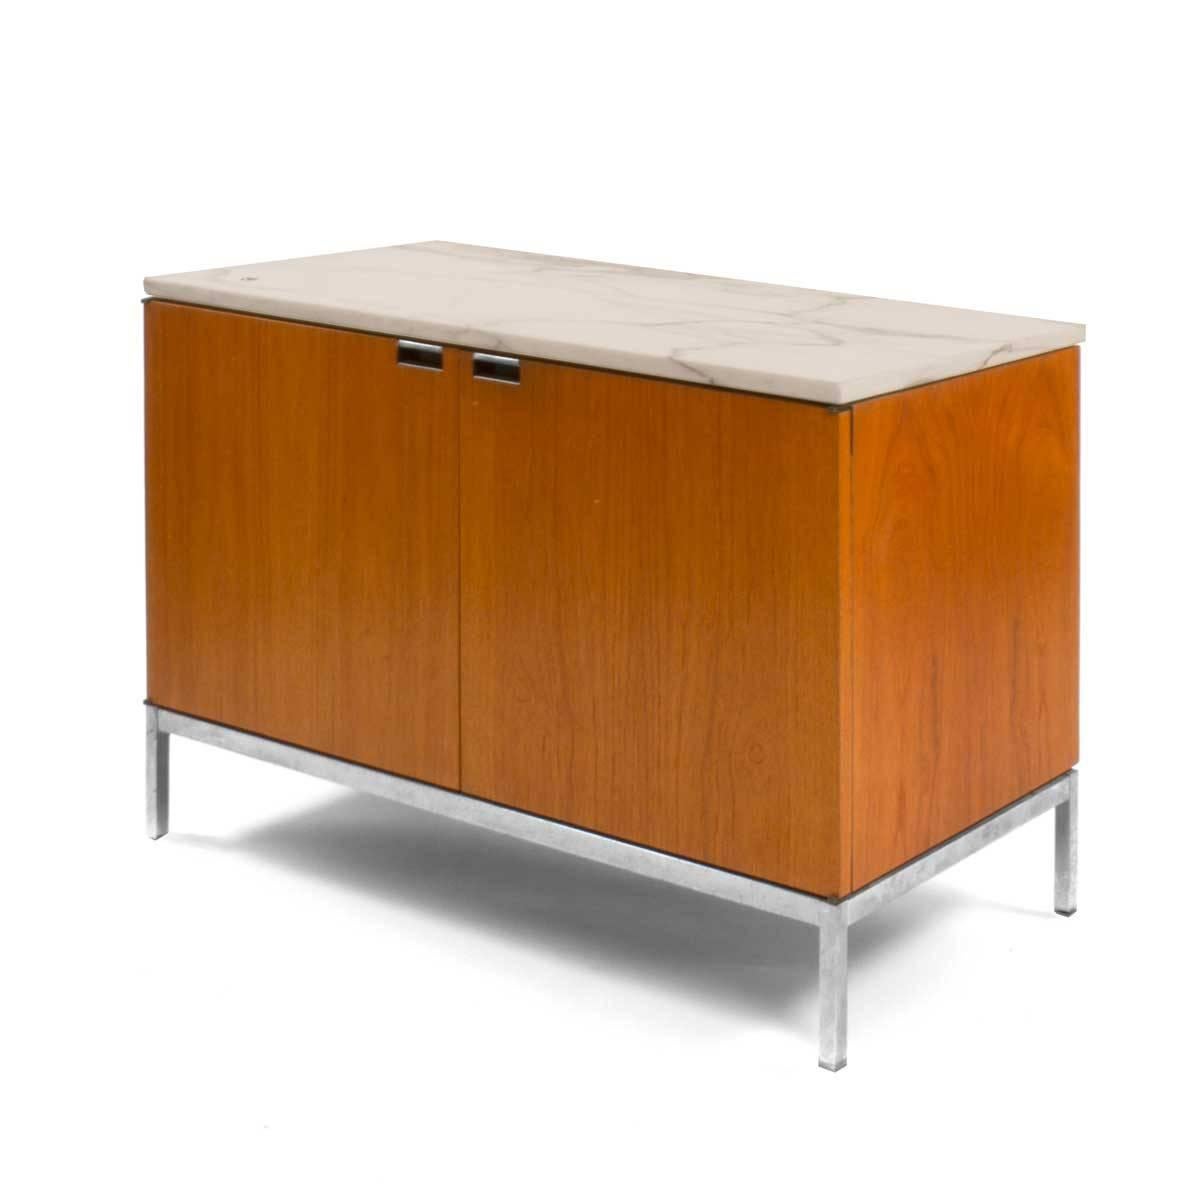 Like so many of her groundbreaking designs that became the gold standard for the industry, the 1961 executive collection, including the series of credenzas, made their way into the pantheon of modern classics. Florence Knoll's designs are reserved